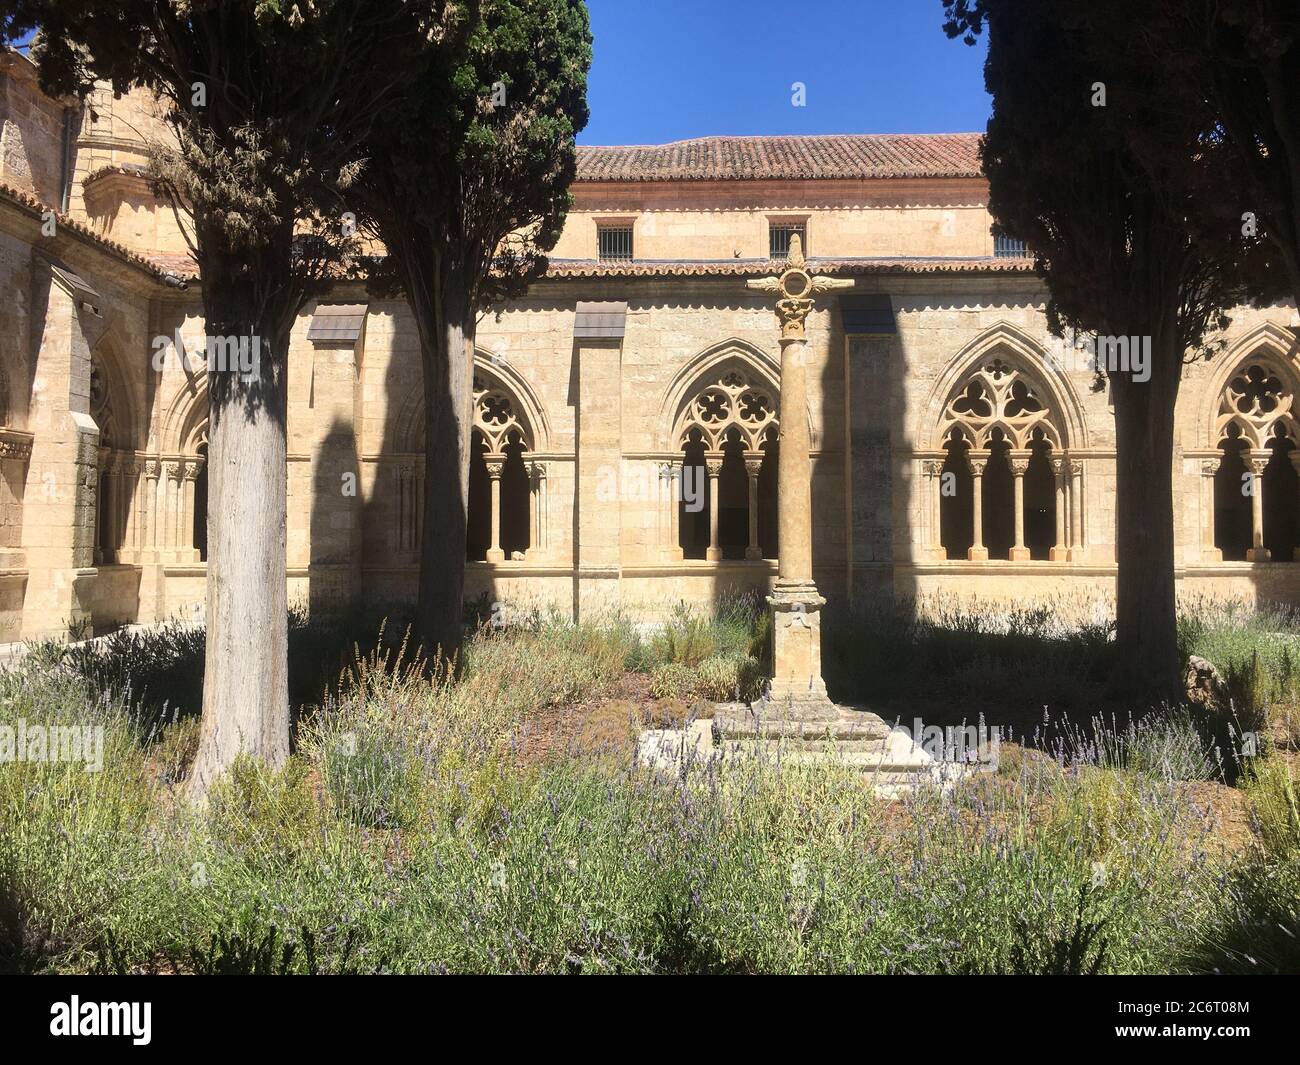 cloister of the cathedral of Ciudad Rodrigo in late Romanesque style Stock Photo